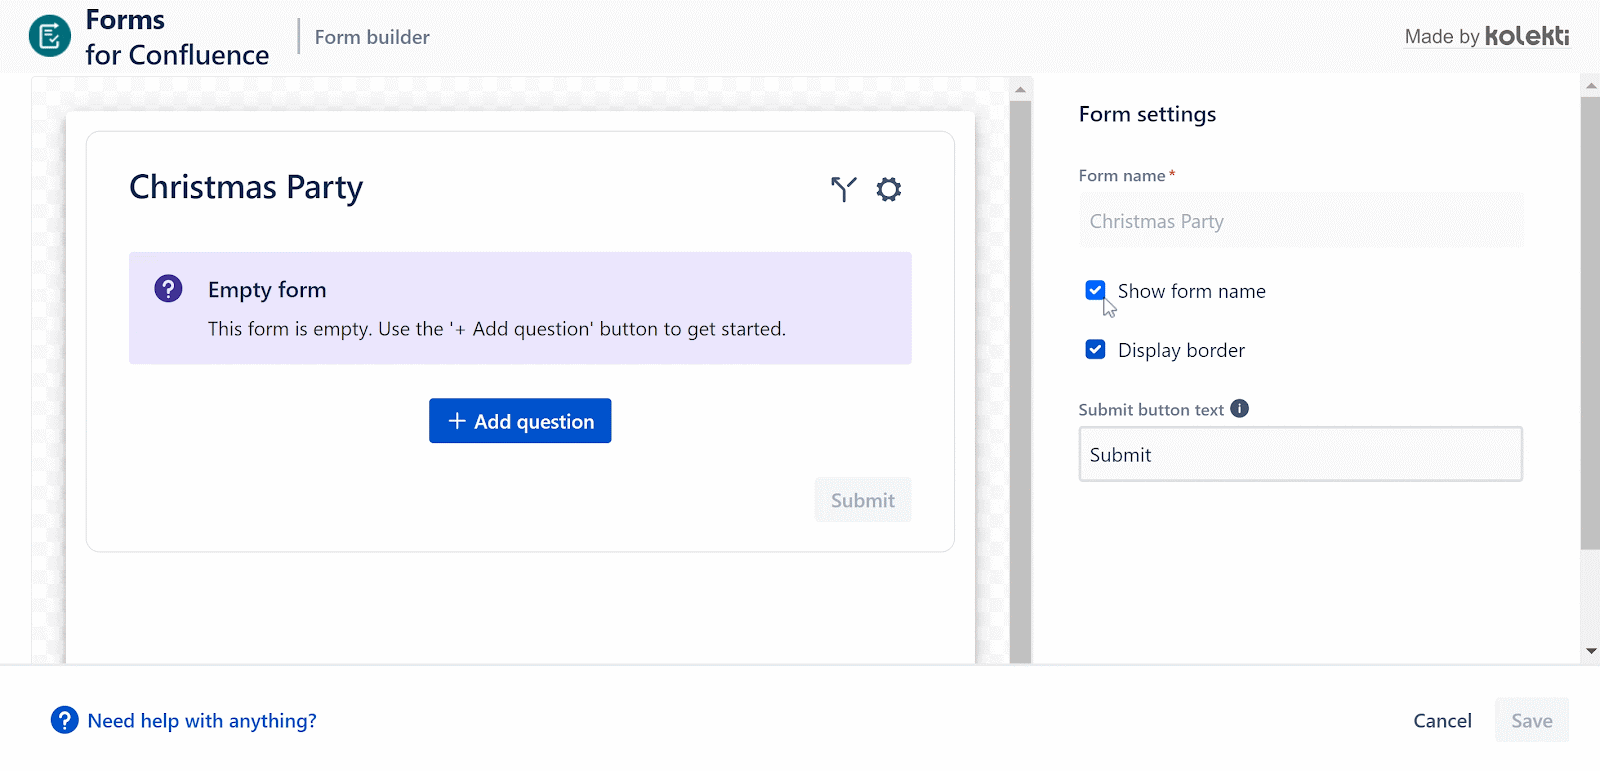 A GIF of a user unselecting the option to display a border on the form